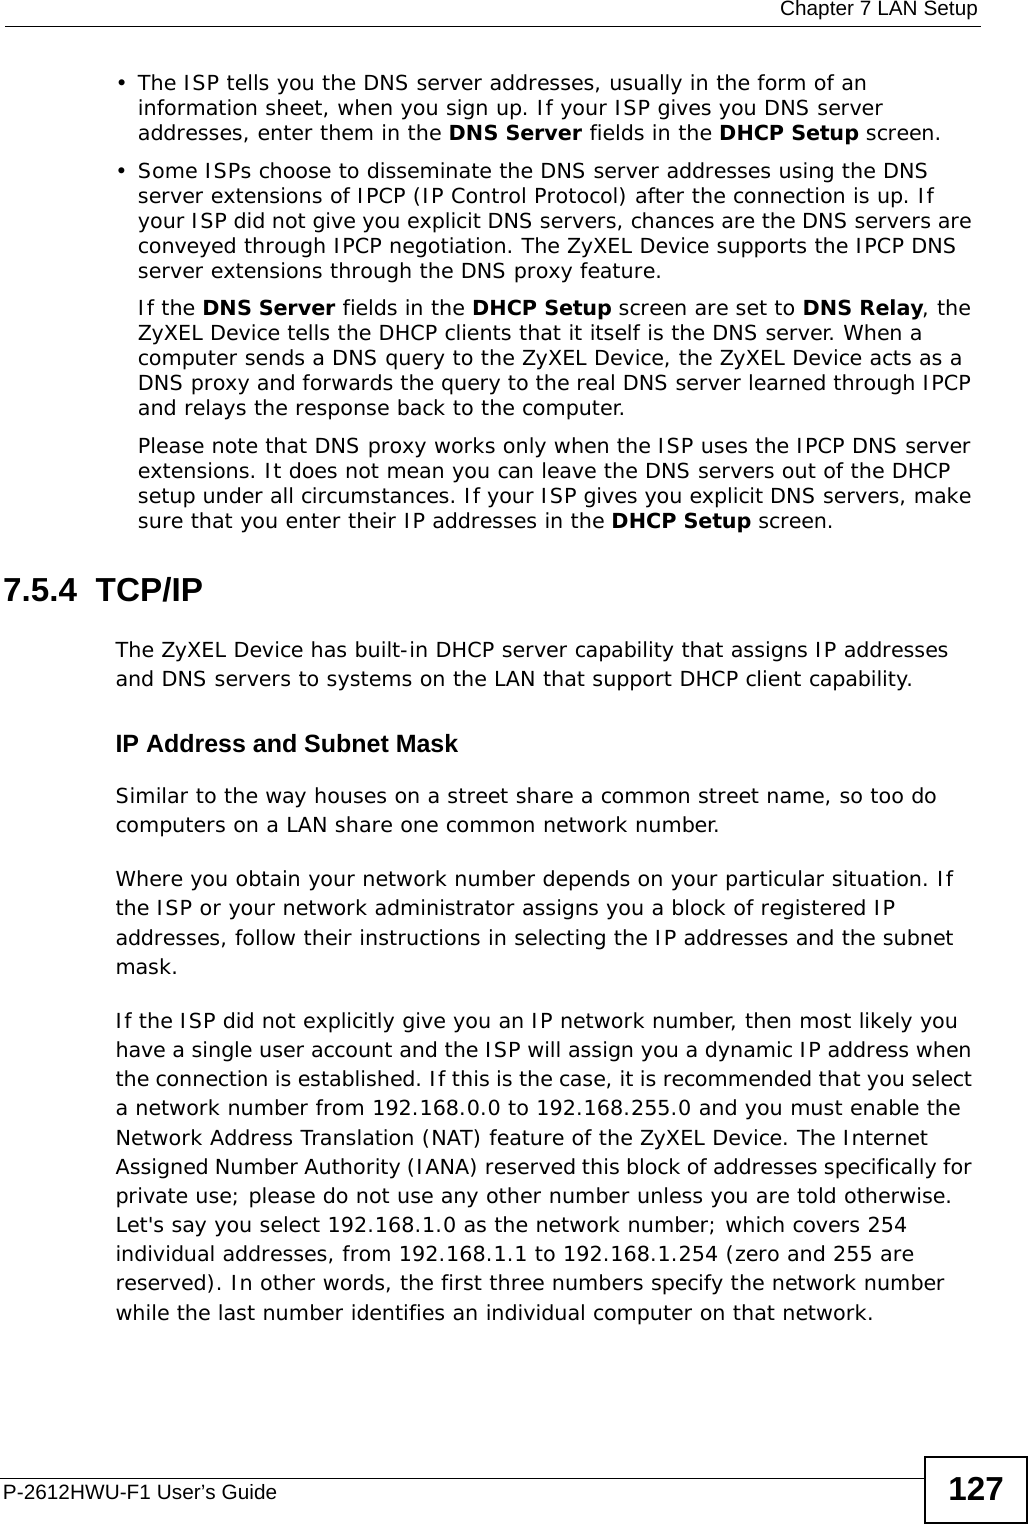  Chapter 7 LAN SetupP-2612HWU-F1 User’s Guide 127• The ISP tells you the DNS server addresses, usually in the form of an information sheet, when you sign up. If your ISP gives you DNS server addresses, enter them in the DNS Server fields in the DHCP Setup screen.• Some ISPs choose to disseminate the DNS server addresses using the DNS server extensions of IPCP (IP Control Protocol) after the connection is up. If your ISP did not give you explicit DNS servers, chances are the DNS servers are conveyed through IPCP negotiation. The ZyXEL Device supports the IPCP DNS server extensions through the DNS proxy feature.If the DNS Server fields in the DHCP Setup screen are set to DNS Relay, the ZyXEL Device tells the DHCP clients that it itself is the DNS server. When a computer sends a DNS query to the ZyXEL Device, the ZyXEL Device acts as a DNS proxy and forwards the query to the real DNS server learned through IPCP and relays the response back to the computer.Please note that DNS proxy works only when the ISP uses the IPCP DNS server extensions. It does not mean you can leave the DNS servers out of the DHCP setup under all circumstances. If your ISP gives you explicit DNS servers, make sure that you enter their IP addresses in the DHCP Setup screen.7.5.4  TCP/IP The ZyXEL Device has built-in DHCP server capability that assigns IP addresses and DNS servers to systems on the LAN that support DHCP client capability.IP Address and Subnet MaskSimilar to the way houses on a street share a common street name, so too do computers on a LAN share one common network number.Where you obtain your network number depends on your particular situation. If the ISP or your network administrator assigns you a block of registered IP addresses, follow their instructions in selecting the IP addresses and the subnet mask.If the ISP did not explicitly give you an IP network number, then most likely you have a single user account and the ISP will assign you a dynamic IP address when the connection is established. If this is the case, it is recommended that you select a network number from 192.168.0.0 to 192.168.255.0 and you must enable the Network Address Translation (NAT) feature of the ZyXEL Device. The Internet Assigned Number Authority (IANA) reserved this block of addresses specifically for private use; please do not use any other number unless you are told otherwise. Let&apos;s say you select 192.168.1.0 as the network number; which covers 254 individual addresses, from 192.168.1.1 to 192.168.1.254 (zero and 255 are reserved). In other words, the first three numbers specify the network number while the last number identifies an individual computer on that network.